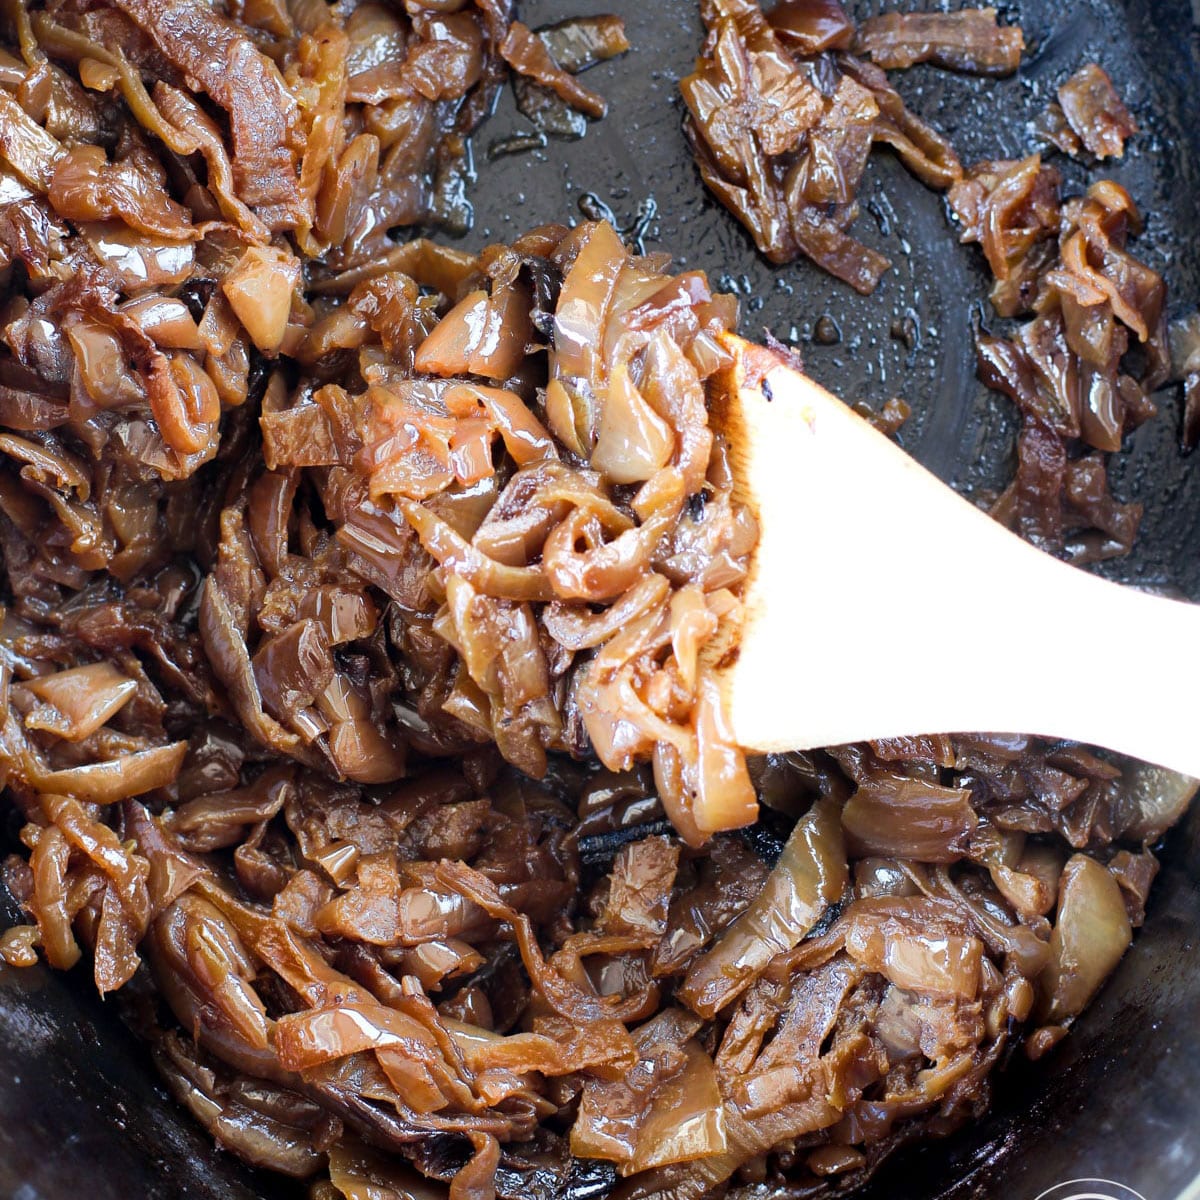 https://hungryhobby.net/wp-content/uploads/2022/10/square-slow-cooker-caramelized-onions-1.jpg